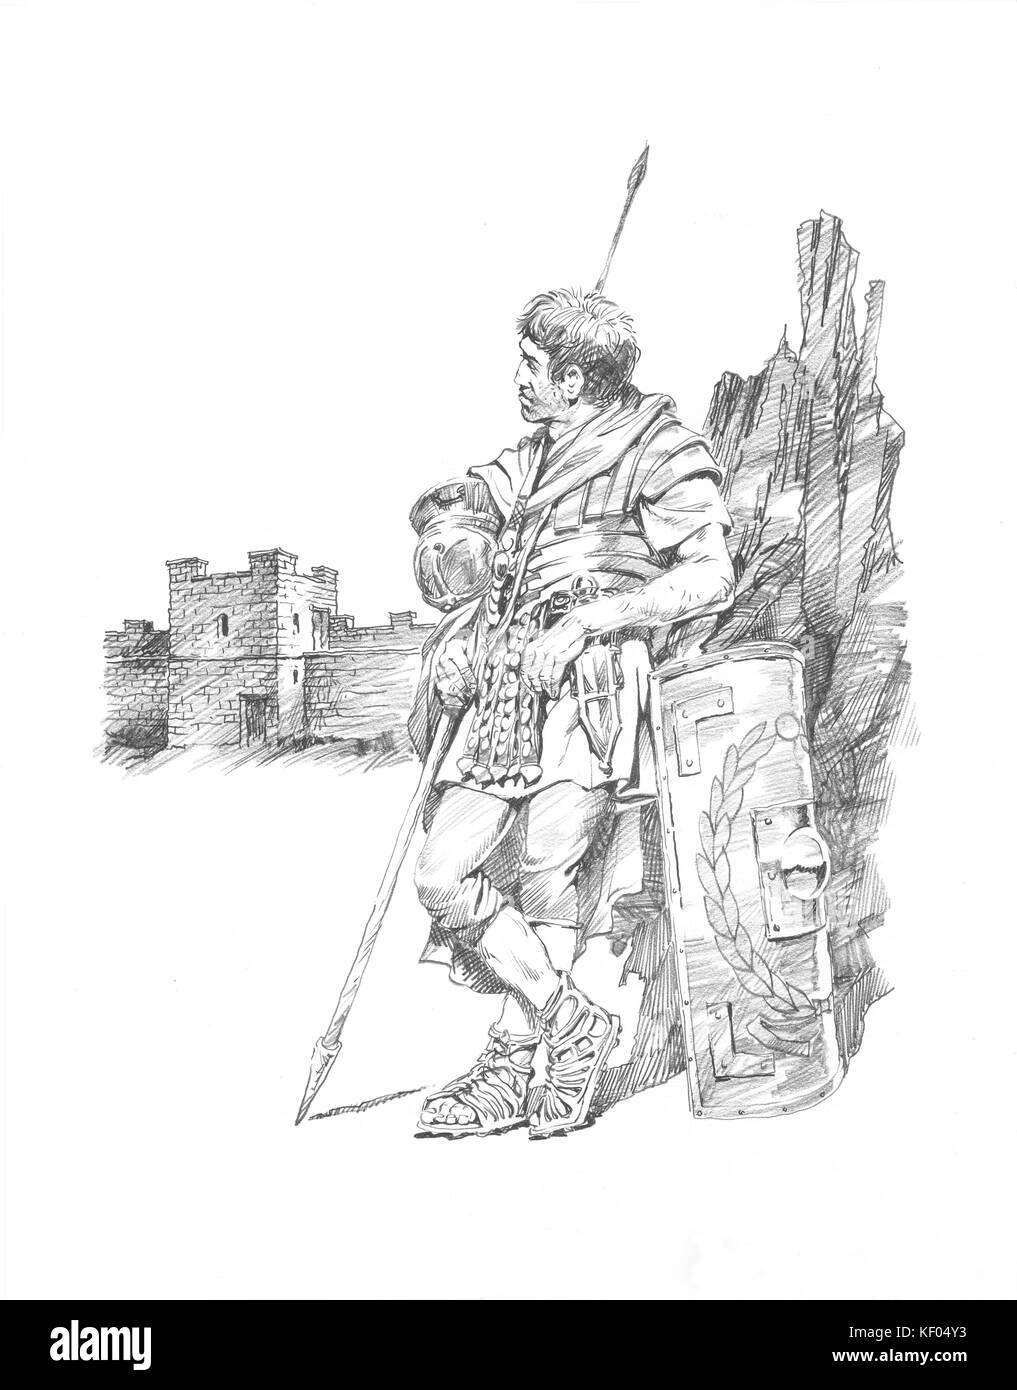 Hadrian's Wall. Reconstruction line drawing of a Roman soldier resting, with shield and pilum. Location based on Black Carts Turret (29a). Attributed  Stock Photo